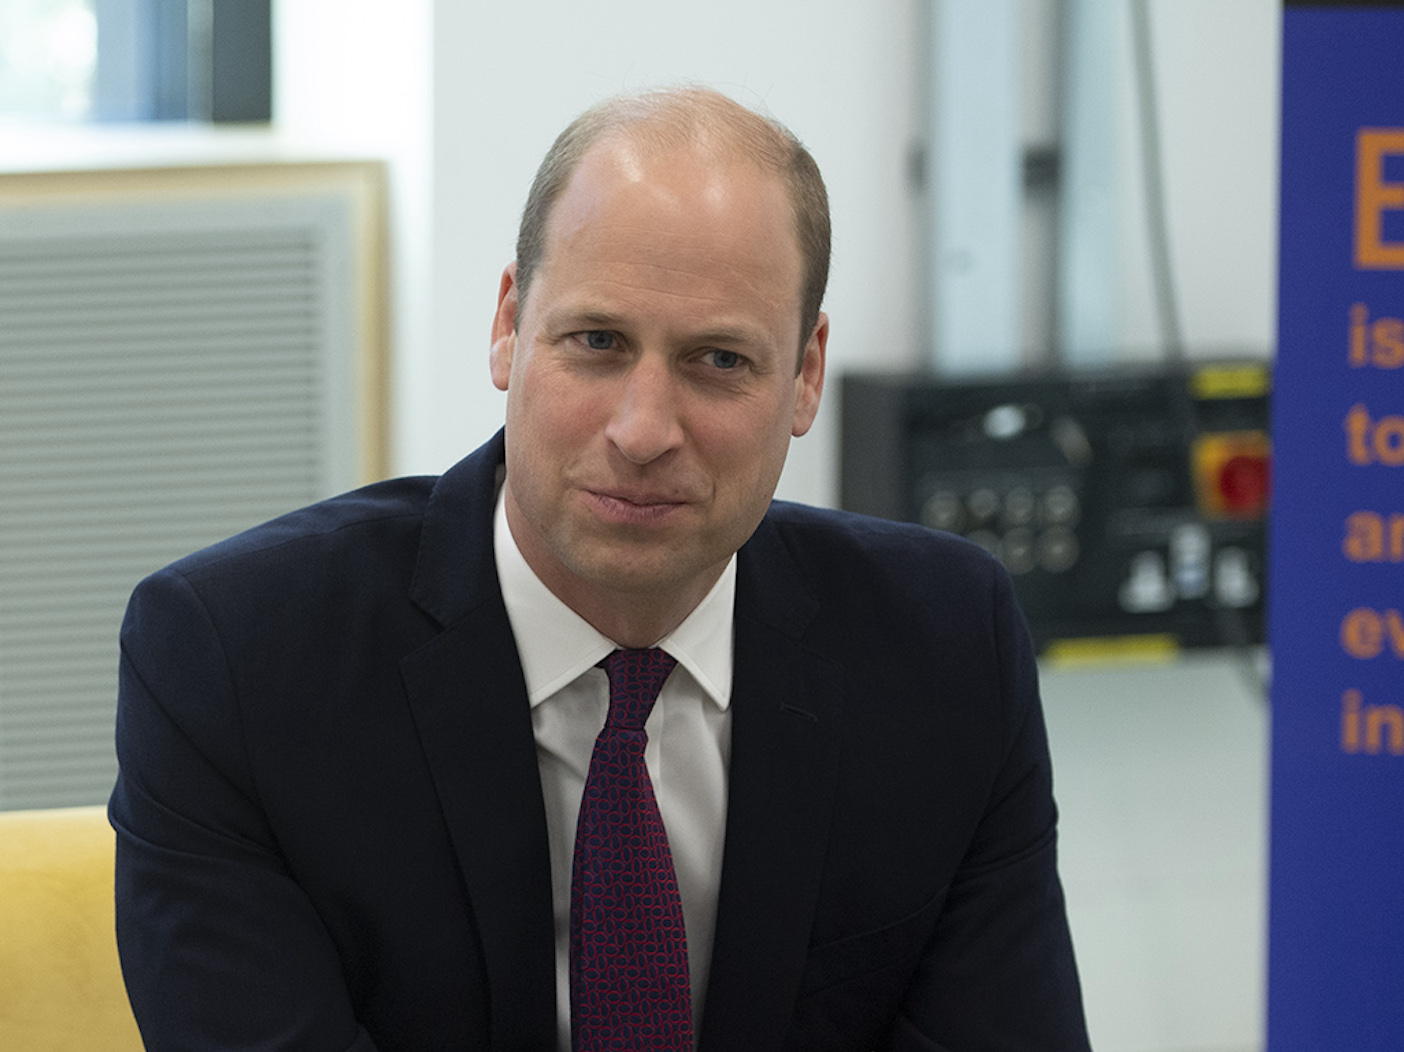 Prince William Heading For New York The Duke is preparing for his second ‘Earthshot Prize Award Ceremony’